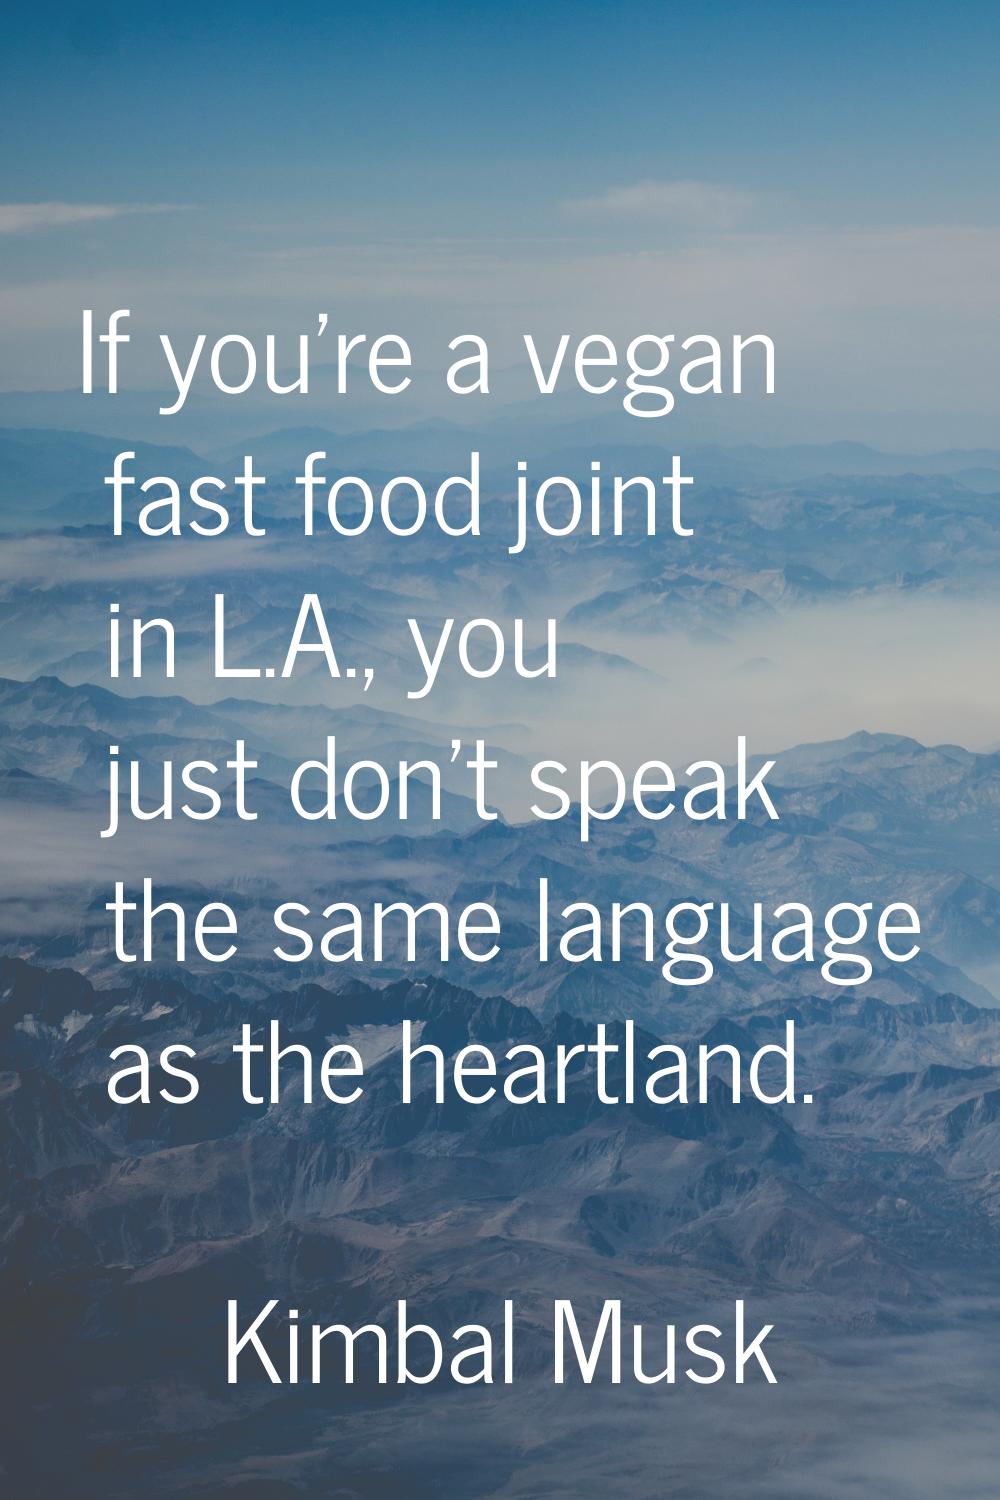 If you're a vegan fast food joint in L.A., you just don't speak the same language as the heartland.